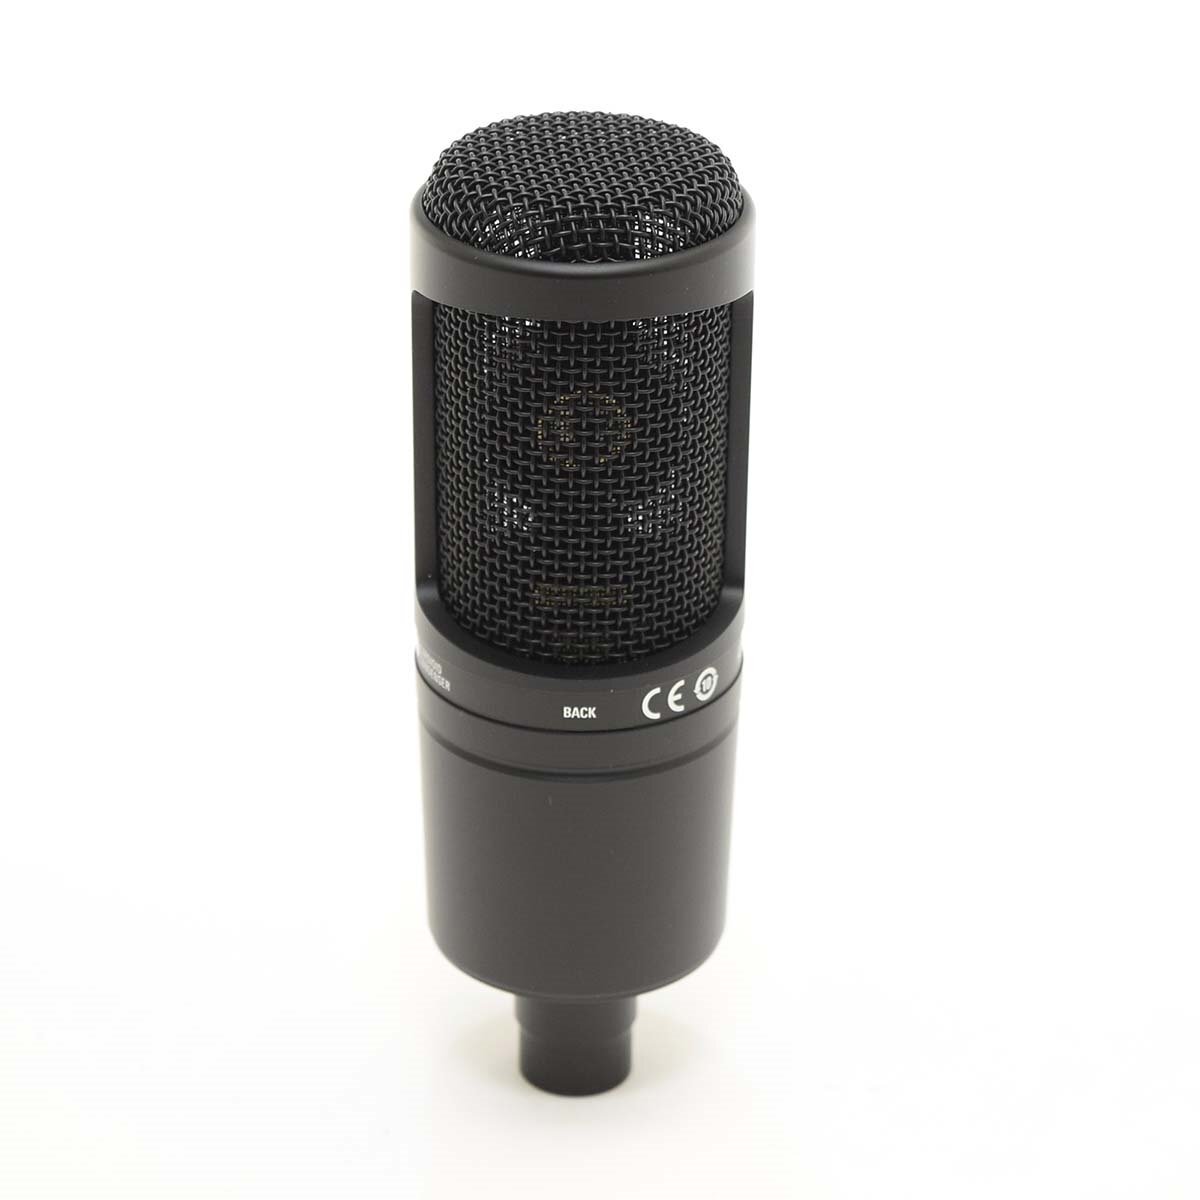 v511539 [ beautiful goods ]Audio-technica condenser microphone AT2020 operation verification settled accessory equipped Audio Technica 